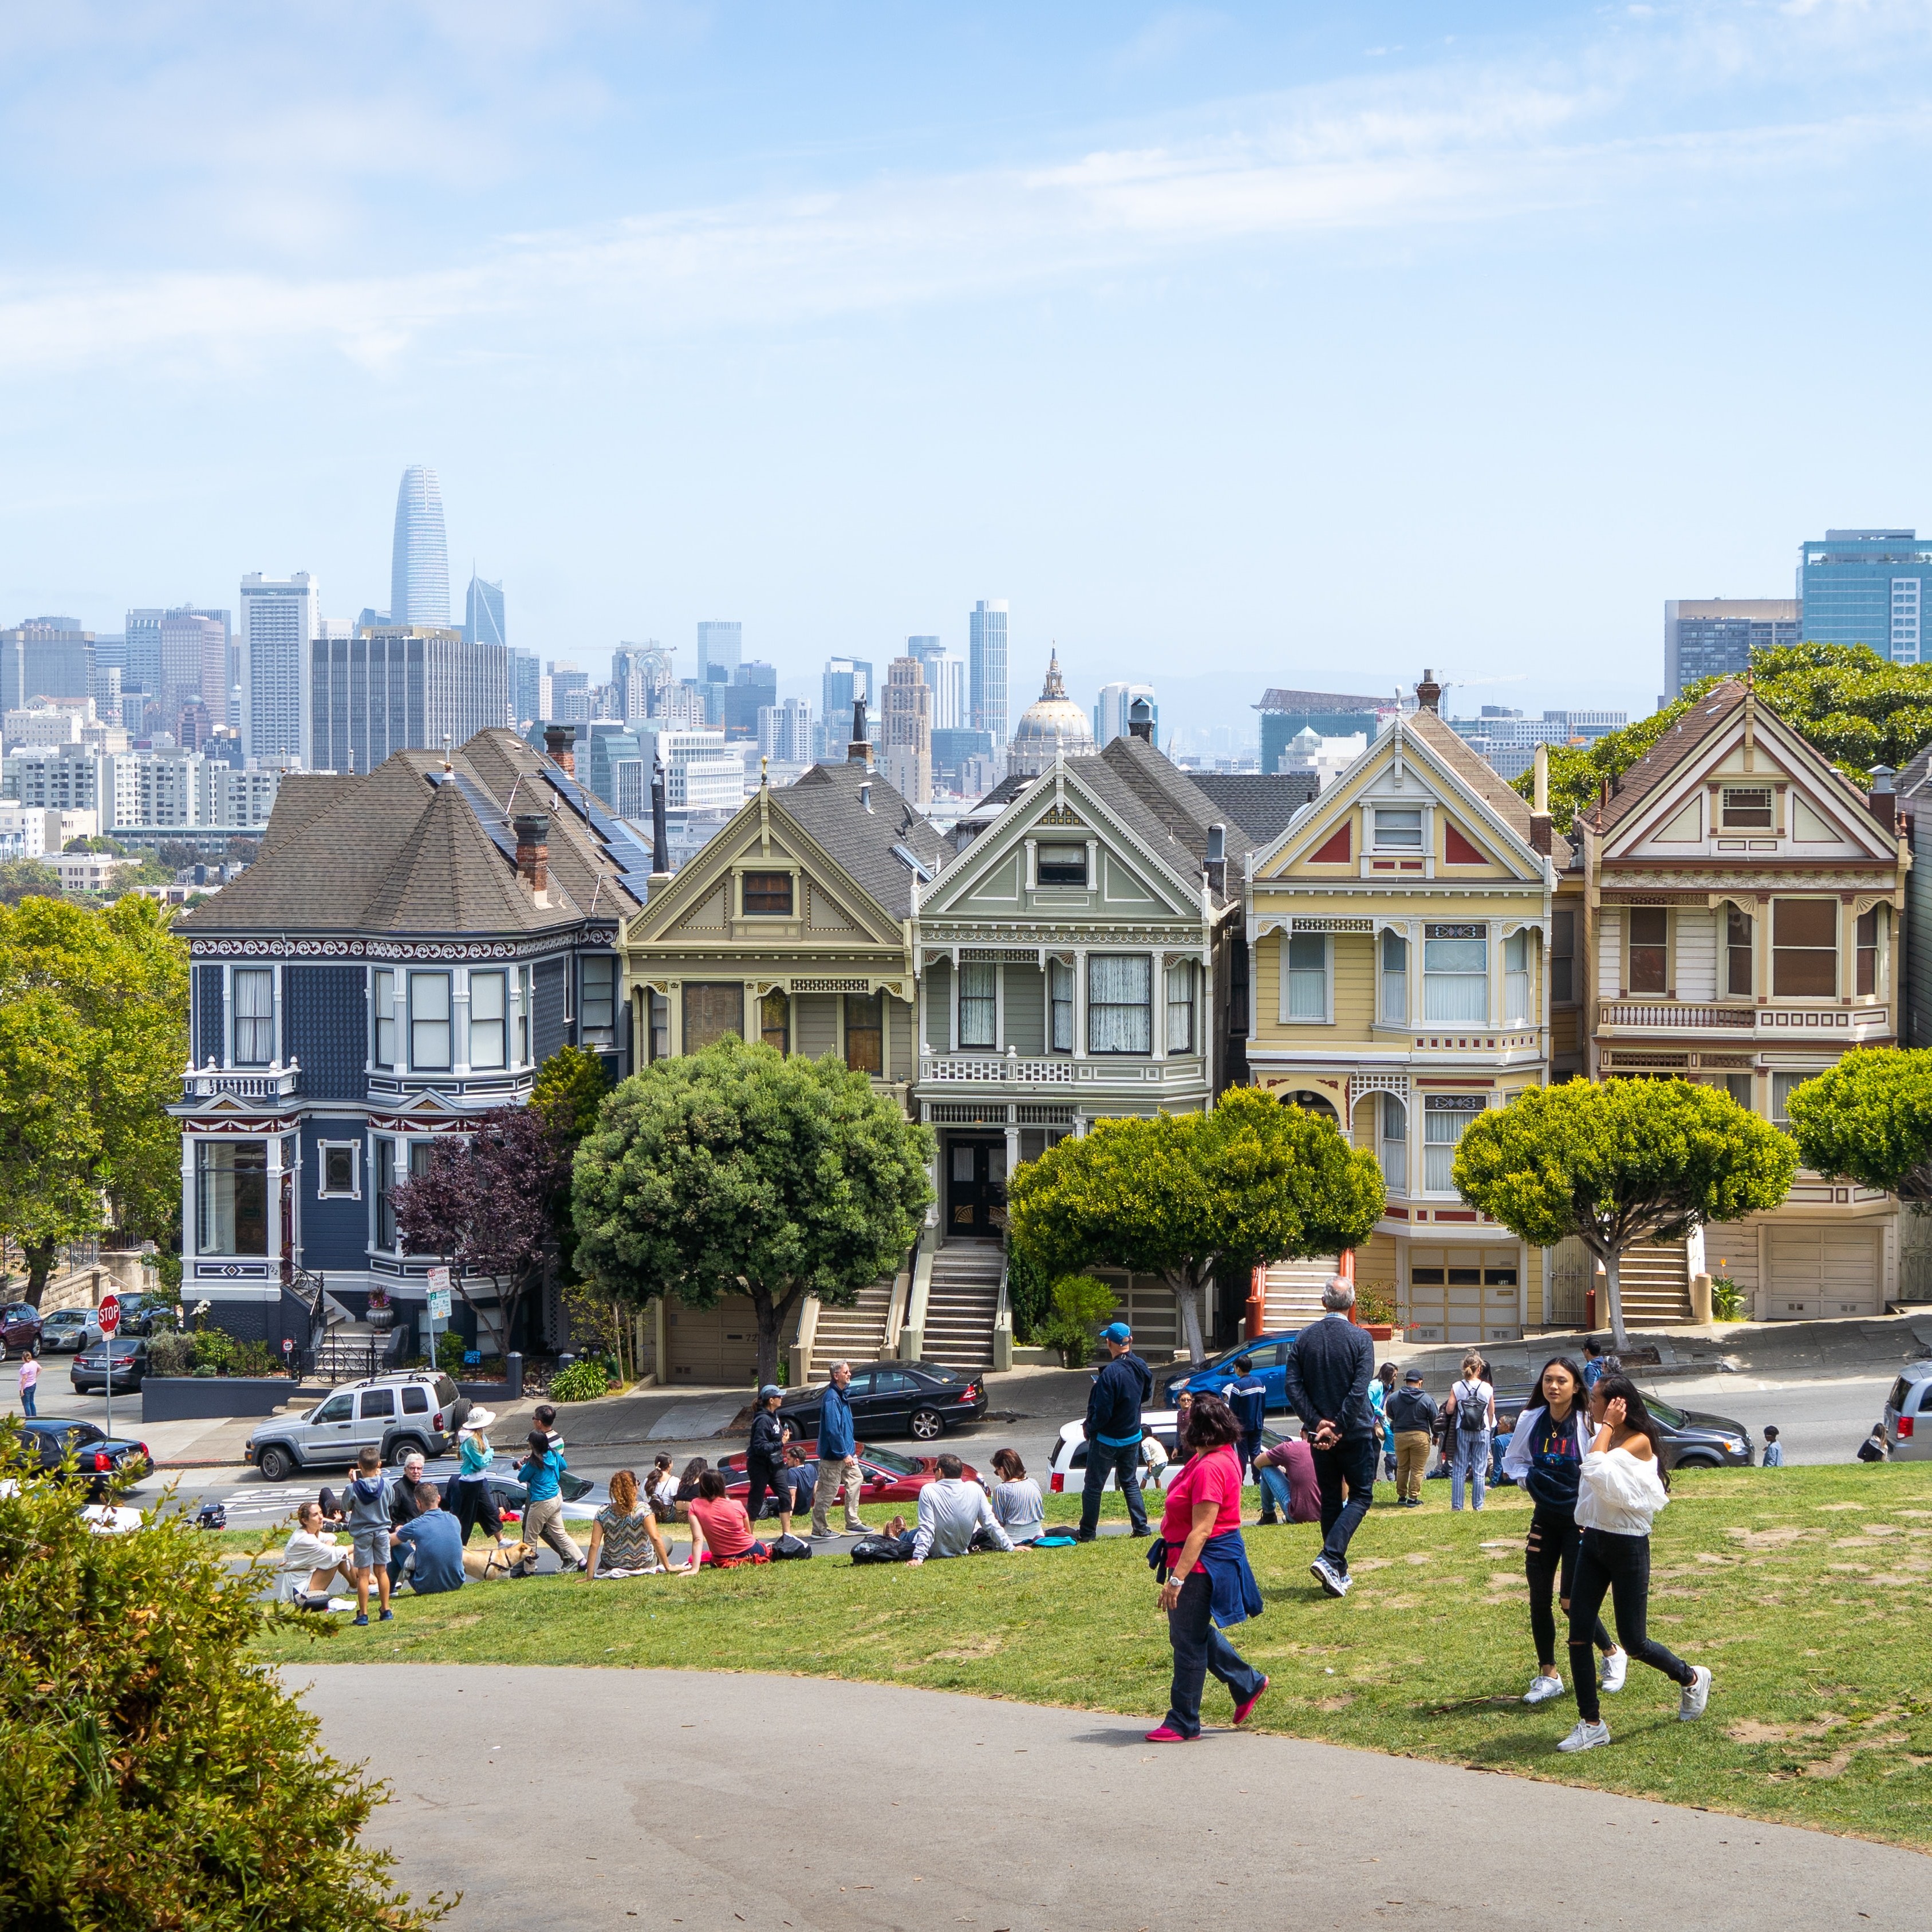 San Francisco's famous "Painted Ladies" Victorian homes are shown in the background with people relaxing and socializing at the park in the foreground